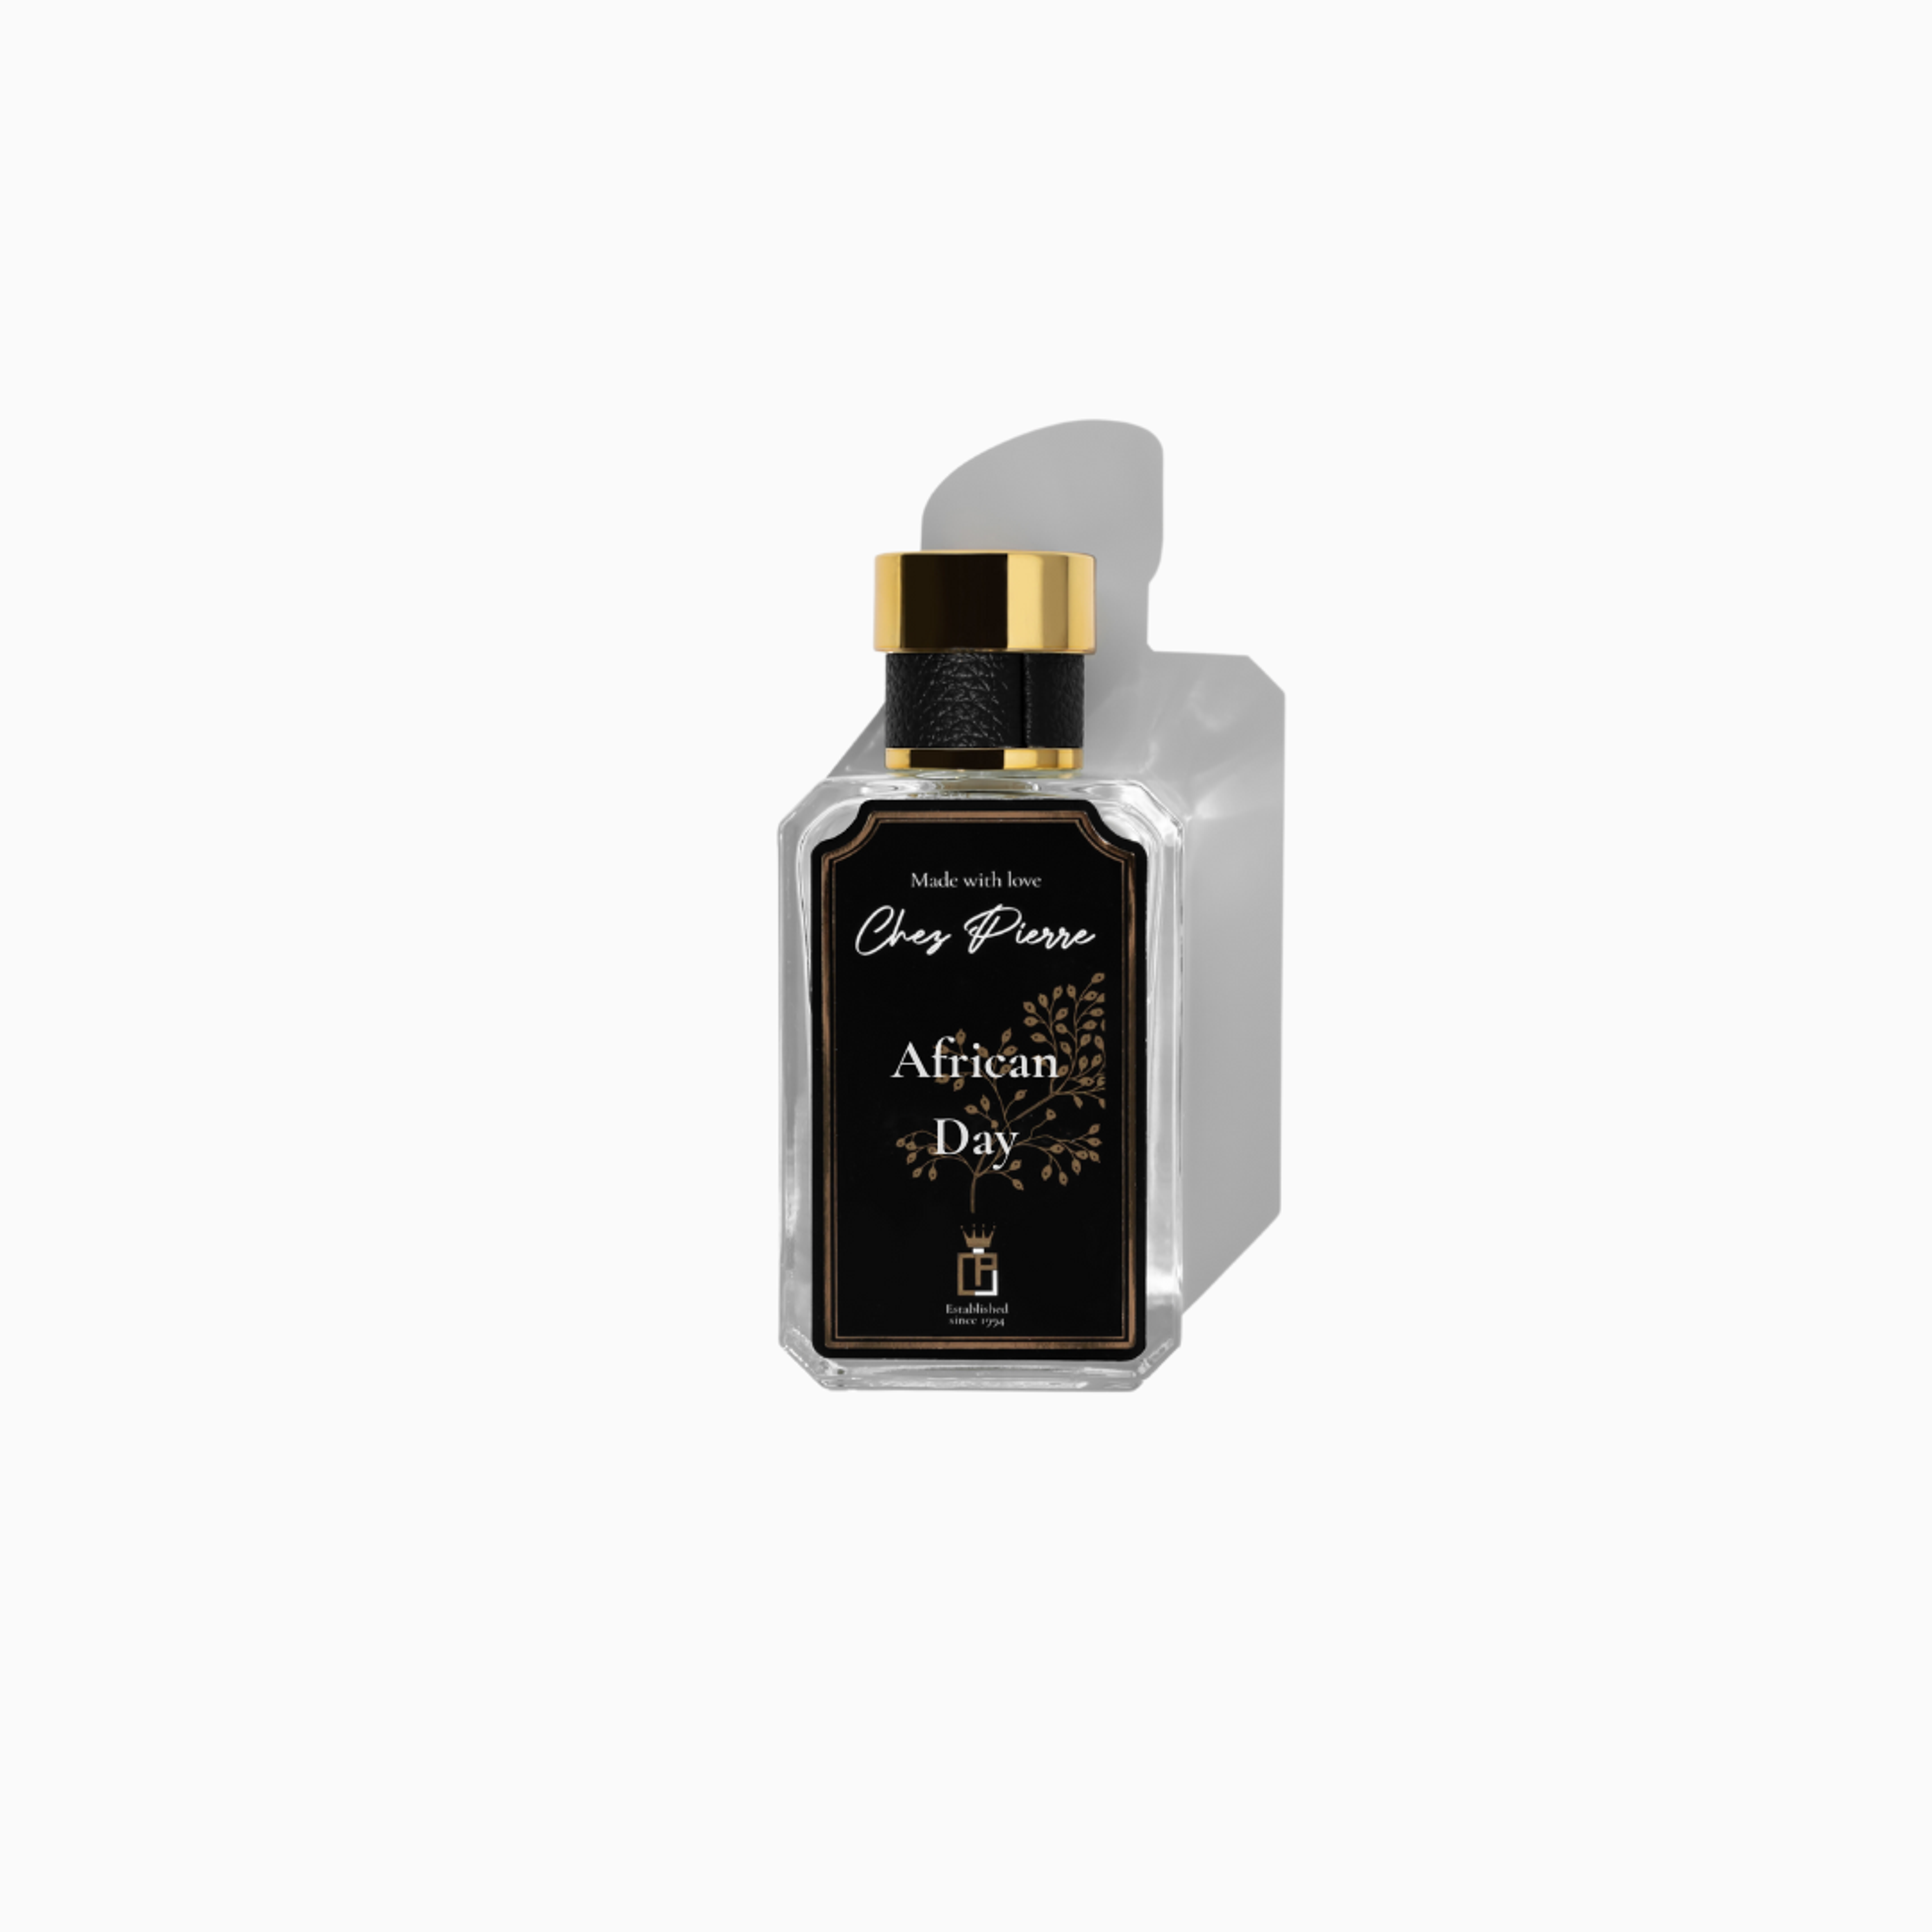 Chez Pierre's African Day Perfume Inspired By Byredo Bal d'Afrique